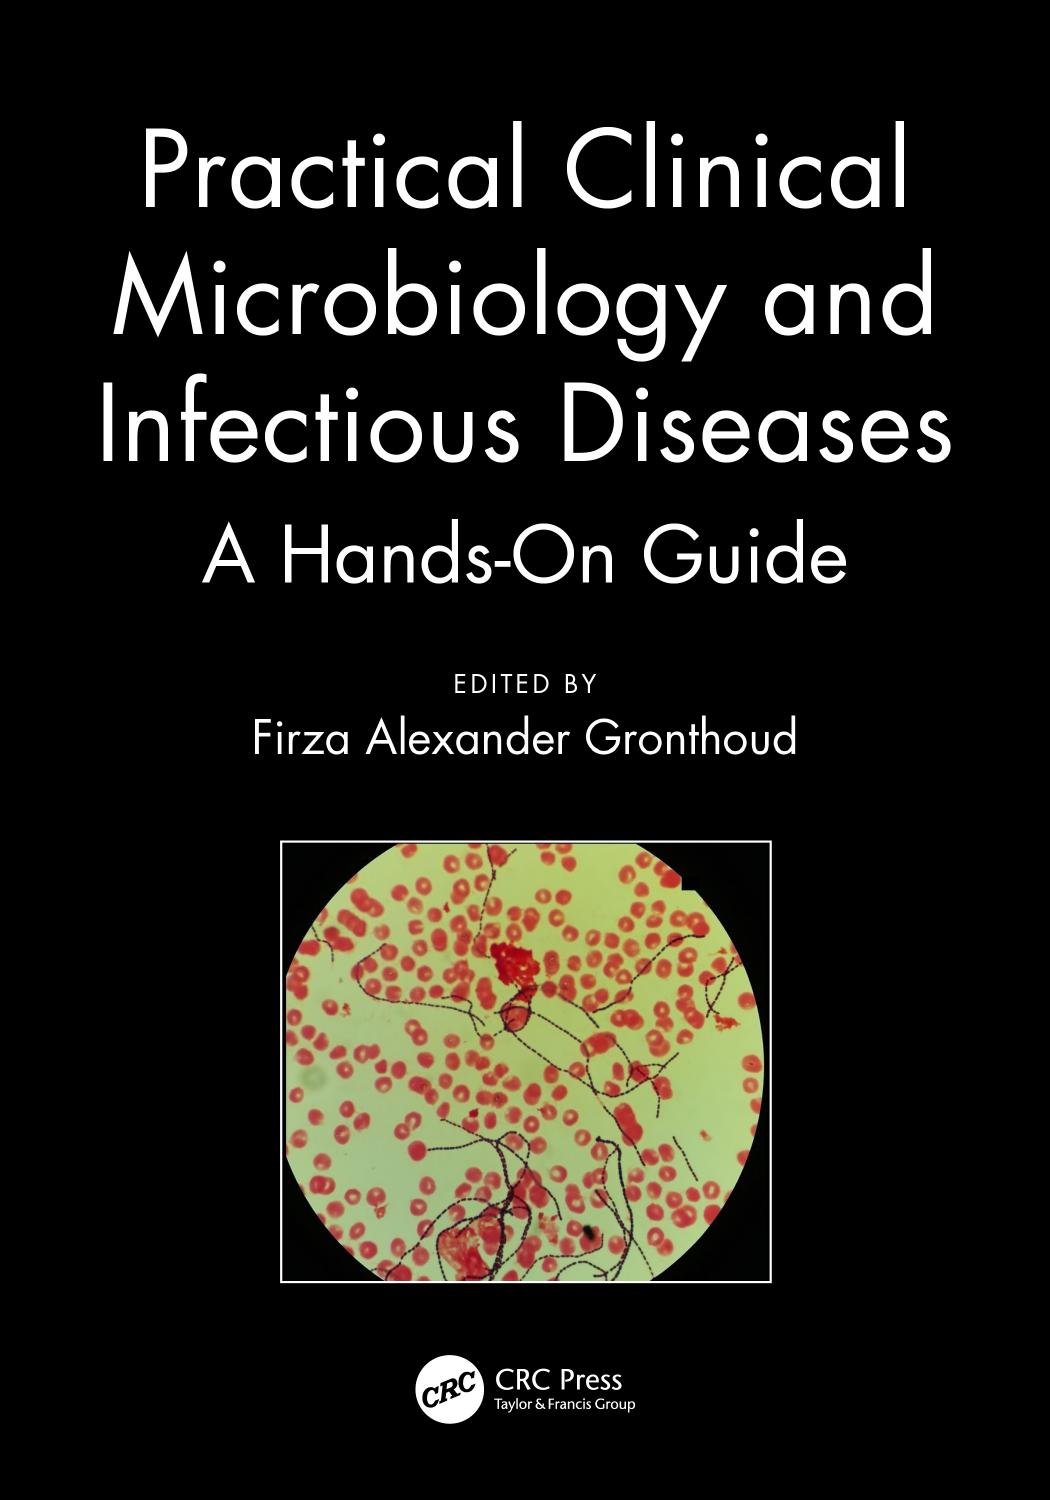 Practical Clinical Microbiology and Infectious Diseases; A Hands-On Guide